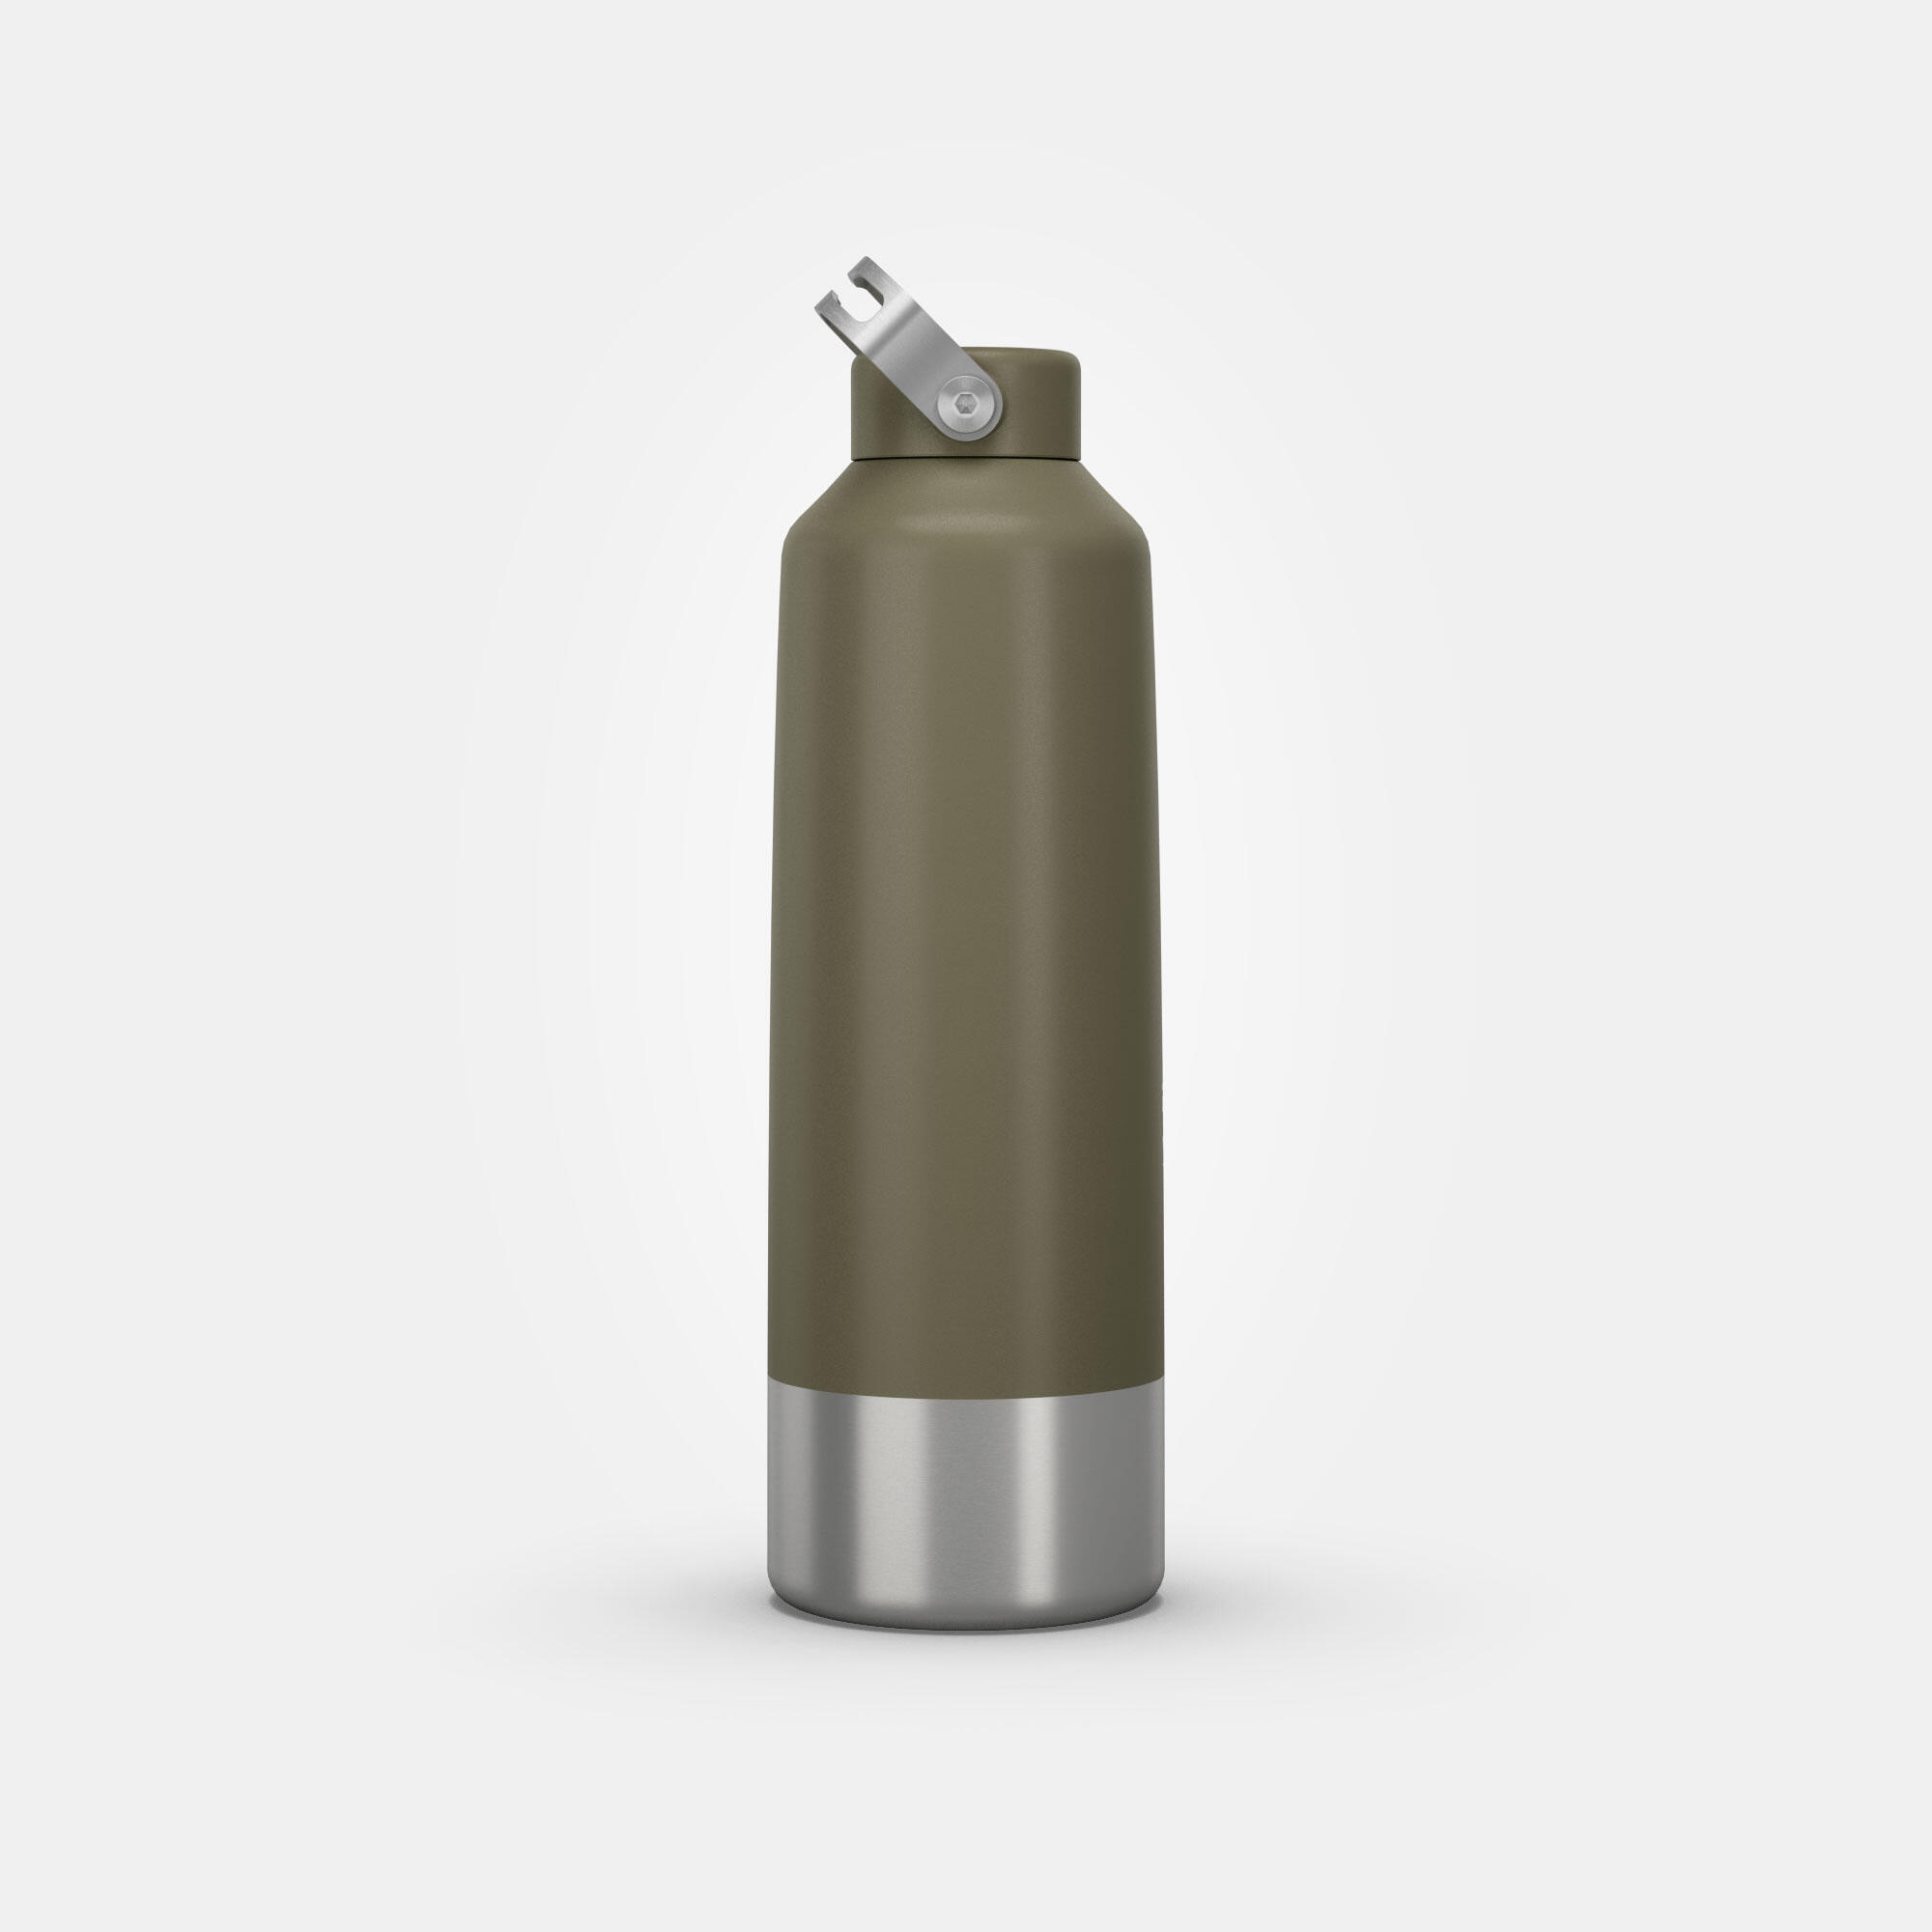 1.5 L stainless steel flask with screw cap for hiking - Khaki 9/10